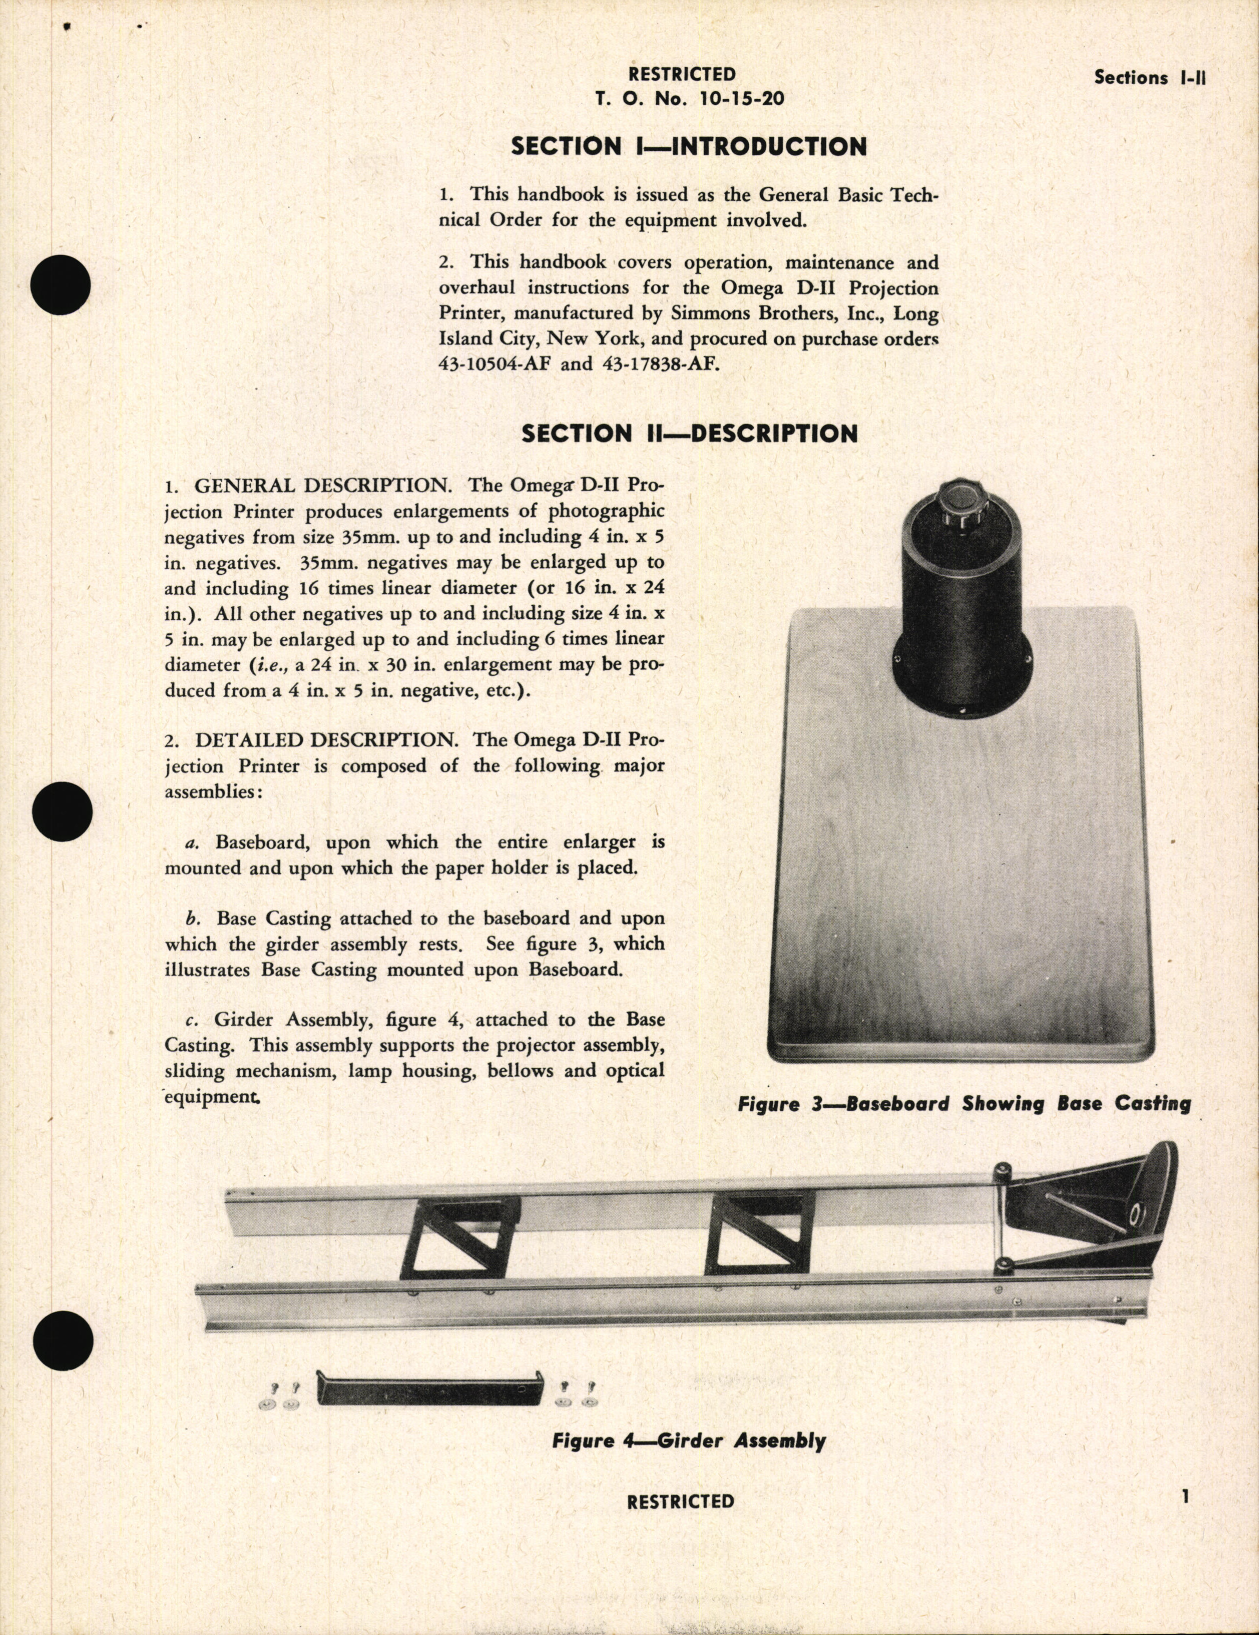 Sample page 7 from AirCorps Library document: Handbook of Instructions with Parts Catalog for Omega D-11 Projection Printer